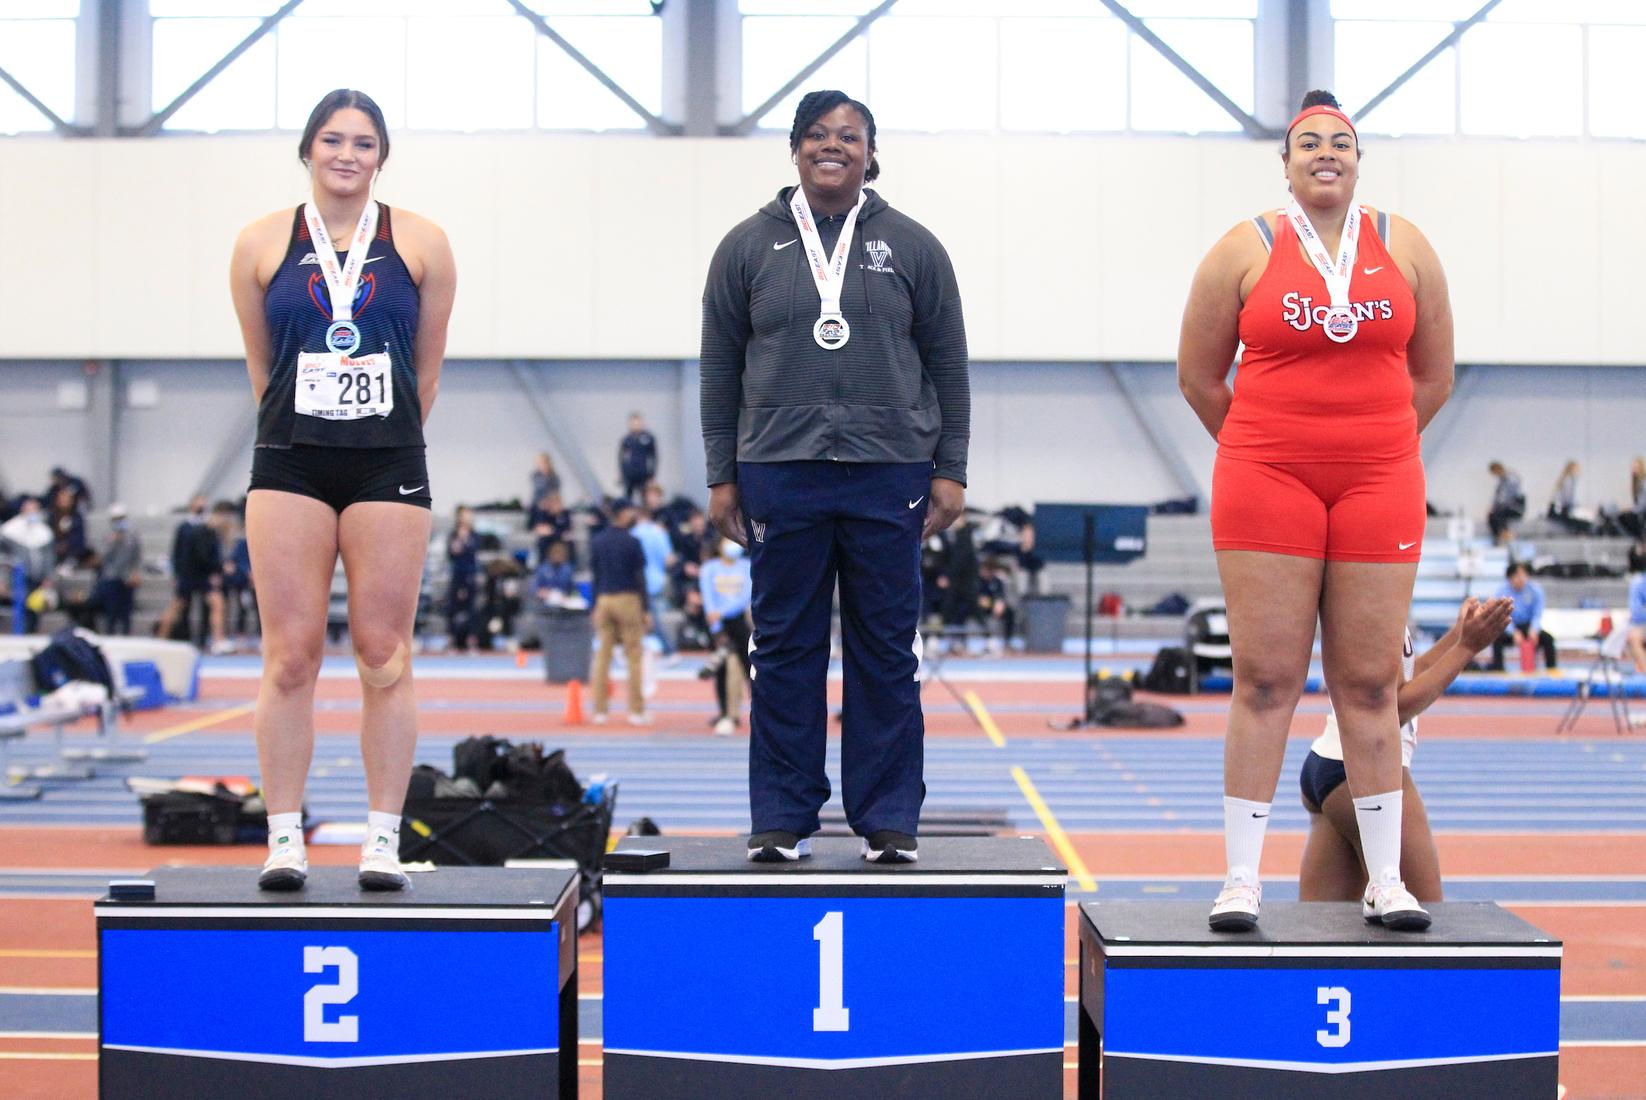 Leah Anderson Named Most Outstanding Performer at BIG EAST Indoor